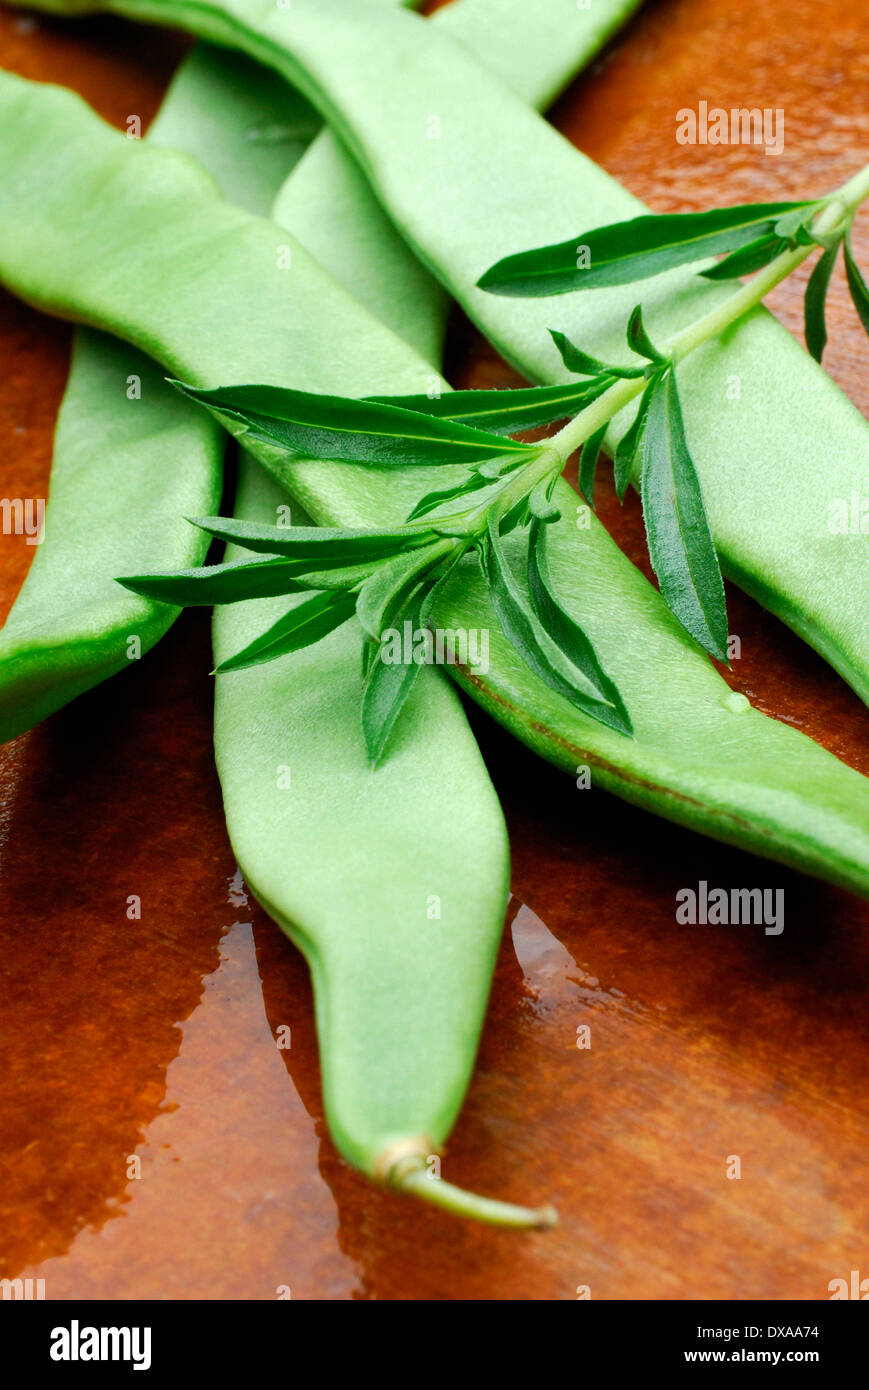 Beans and Summer Savory Stock Photo